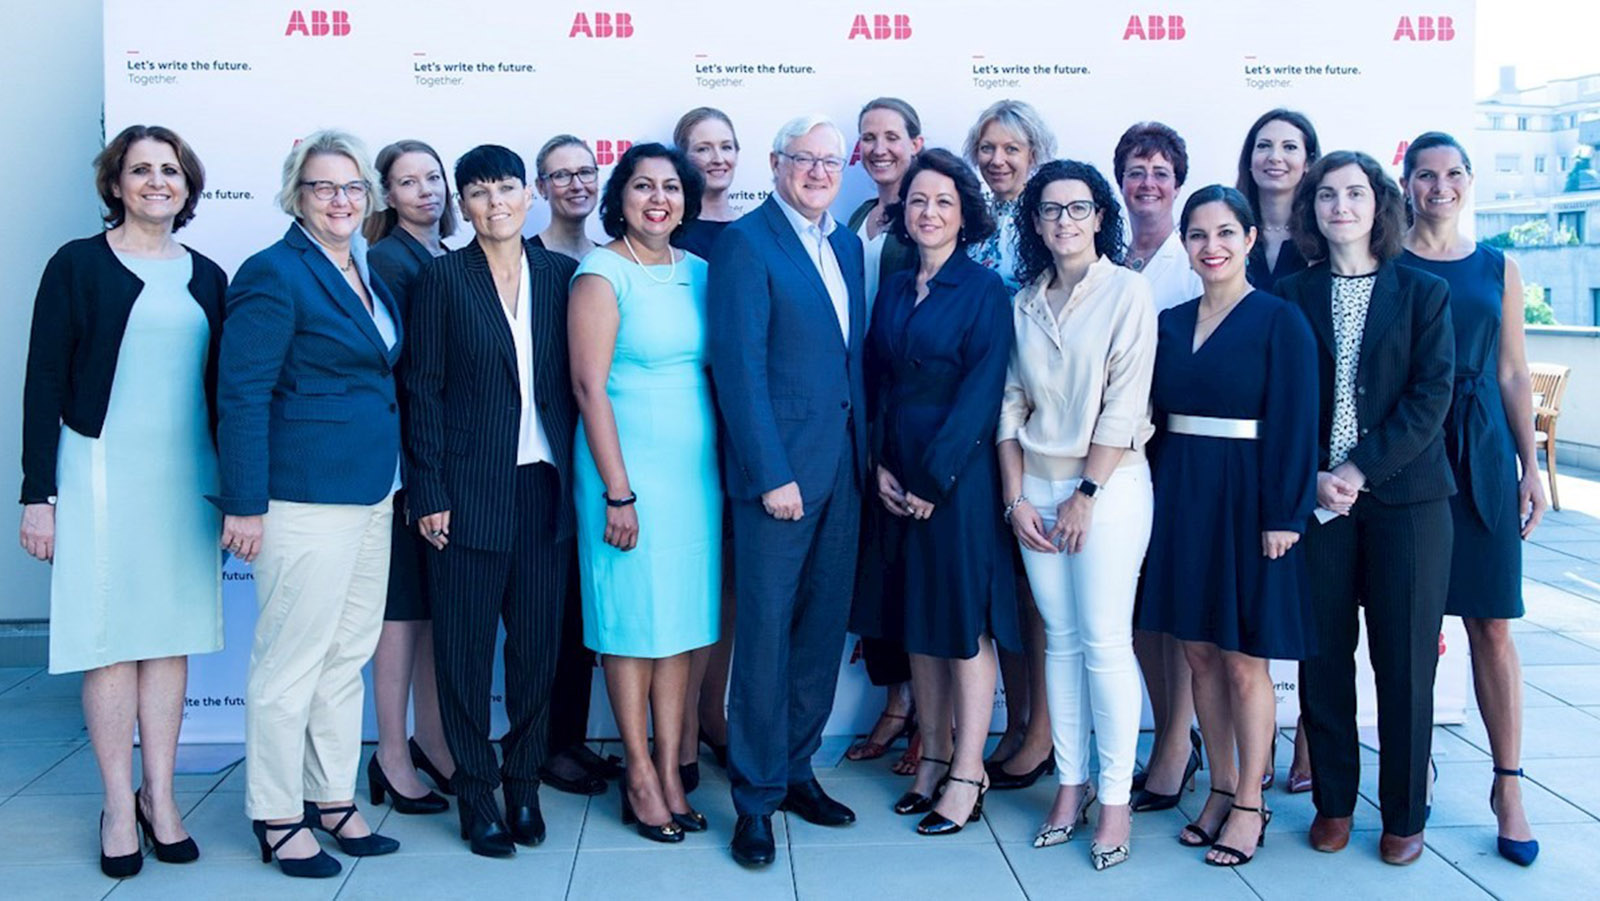 The 2019 Global Summit of Women, ABB female employees with the CEO Peter Voser (photo)